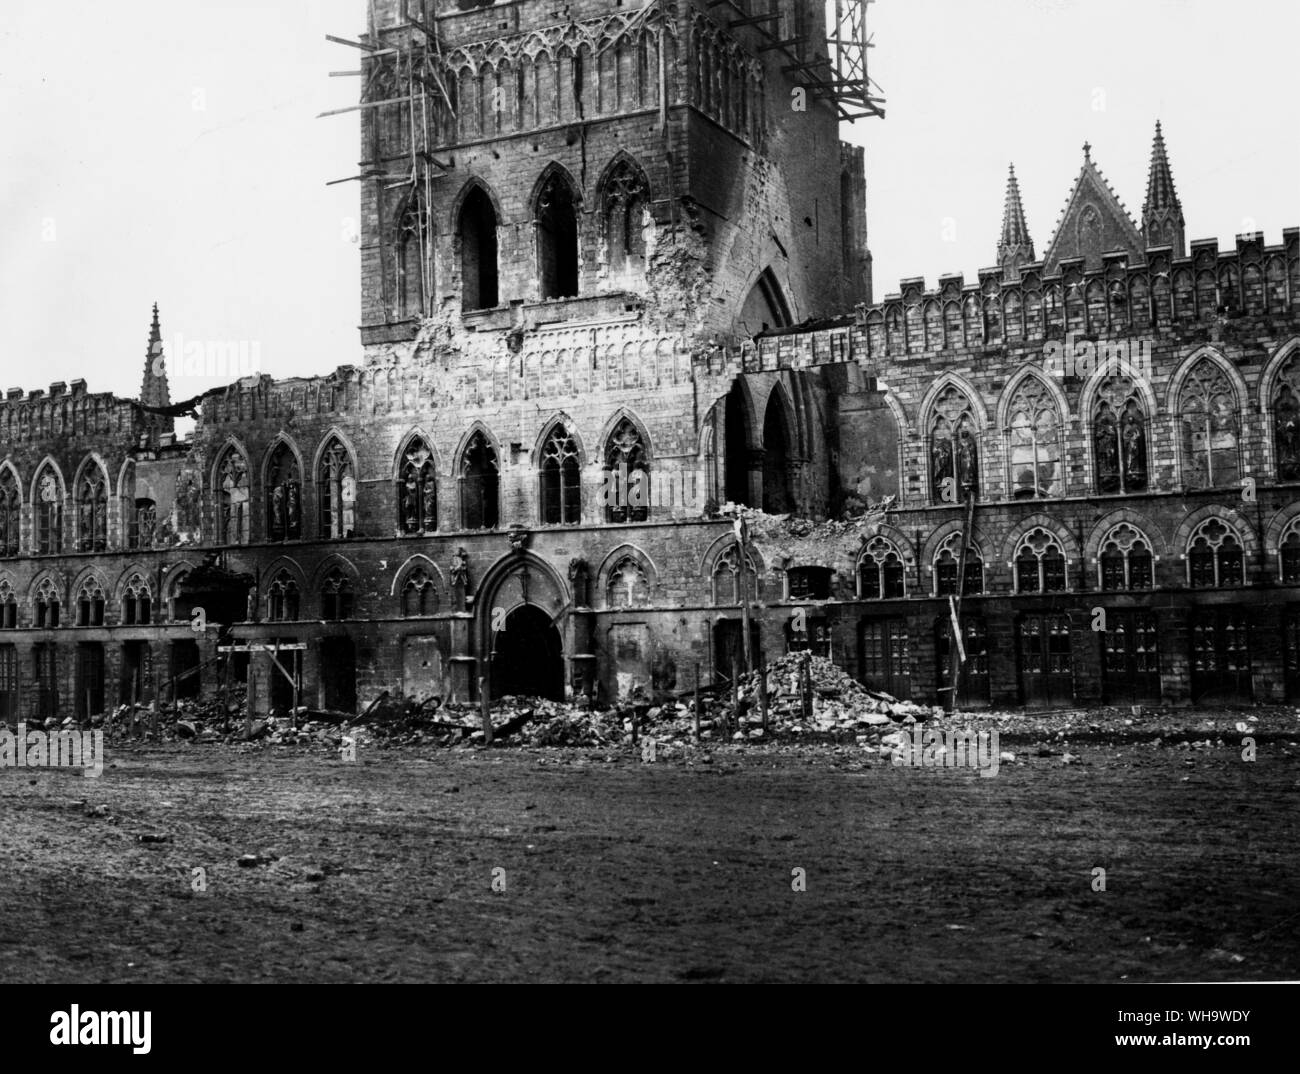 WW1: Ypres Clock-Hall, France. Bombed during war. Stock Photo